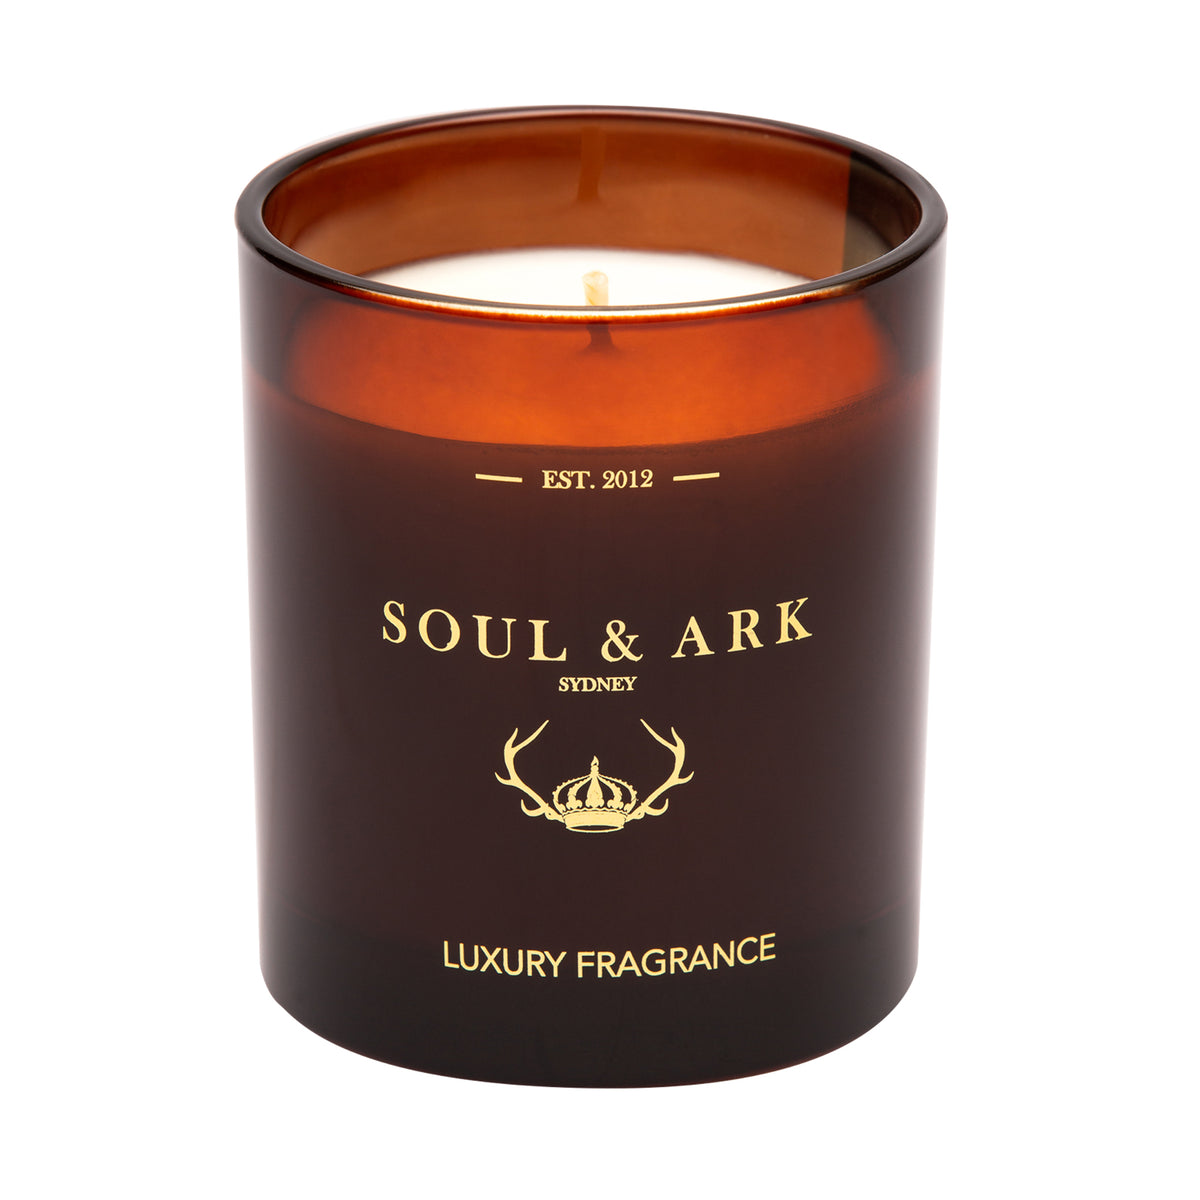 Soul & Ark Amber Glass Soy Candle